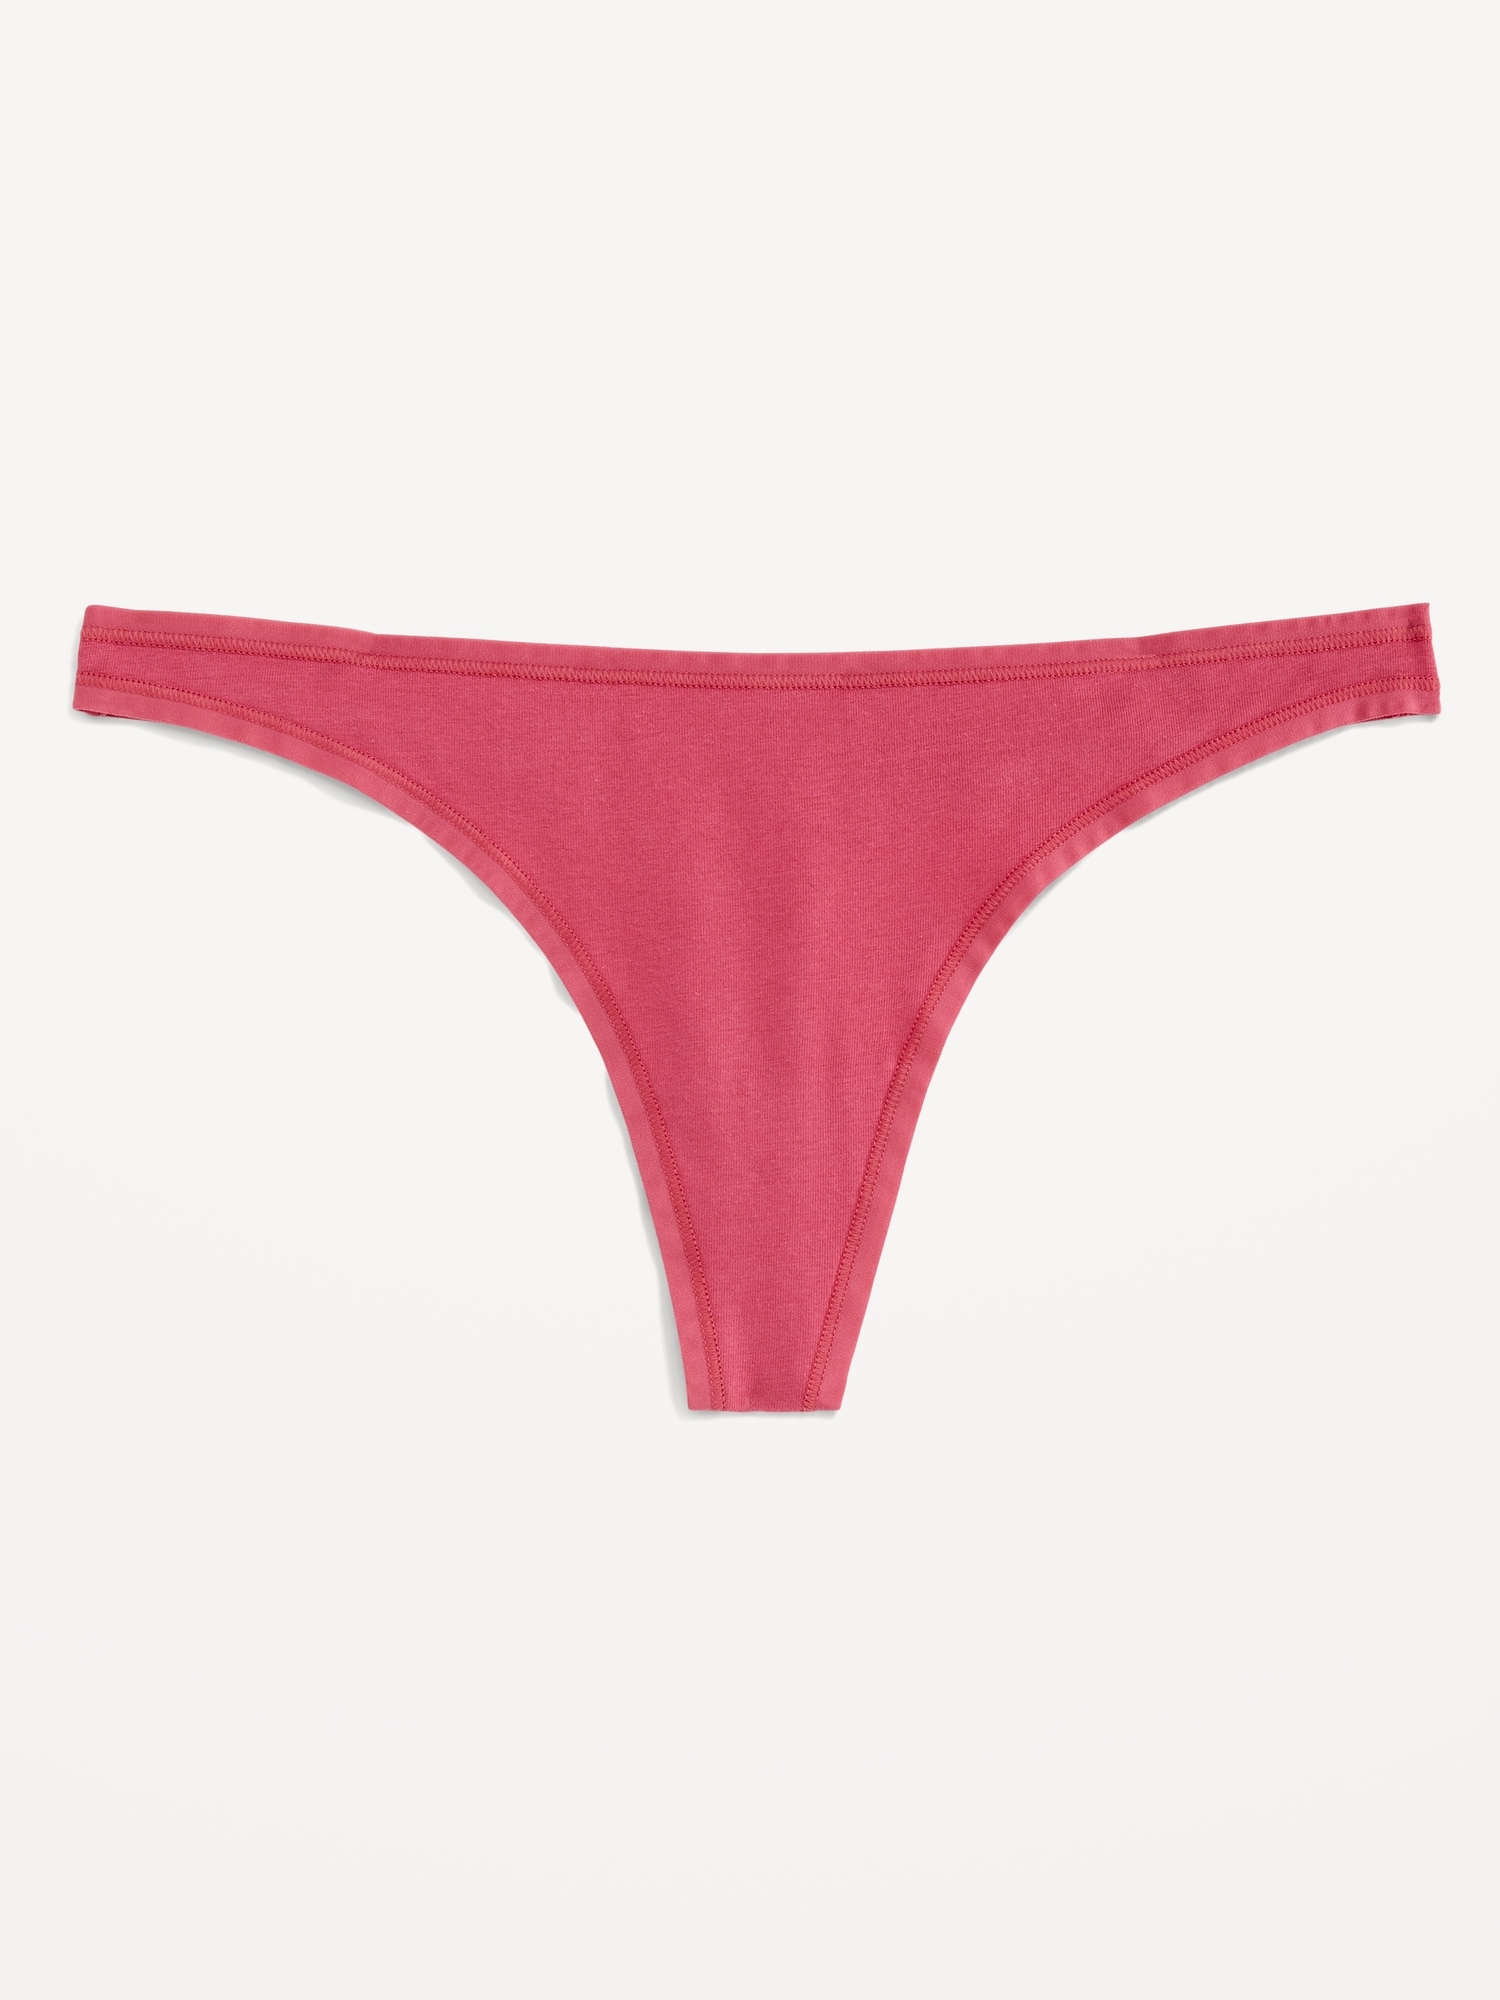 Old Navy Matching Low-Rise Classic Thong Underwear for Women pink. 1